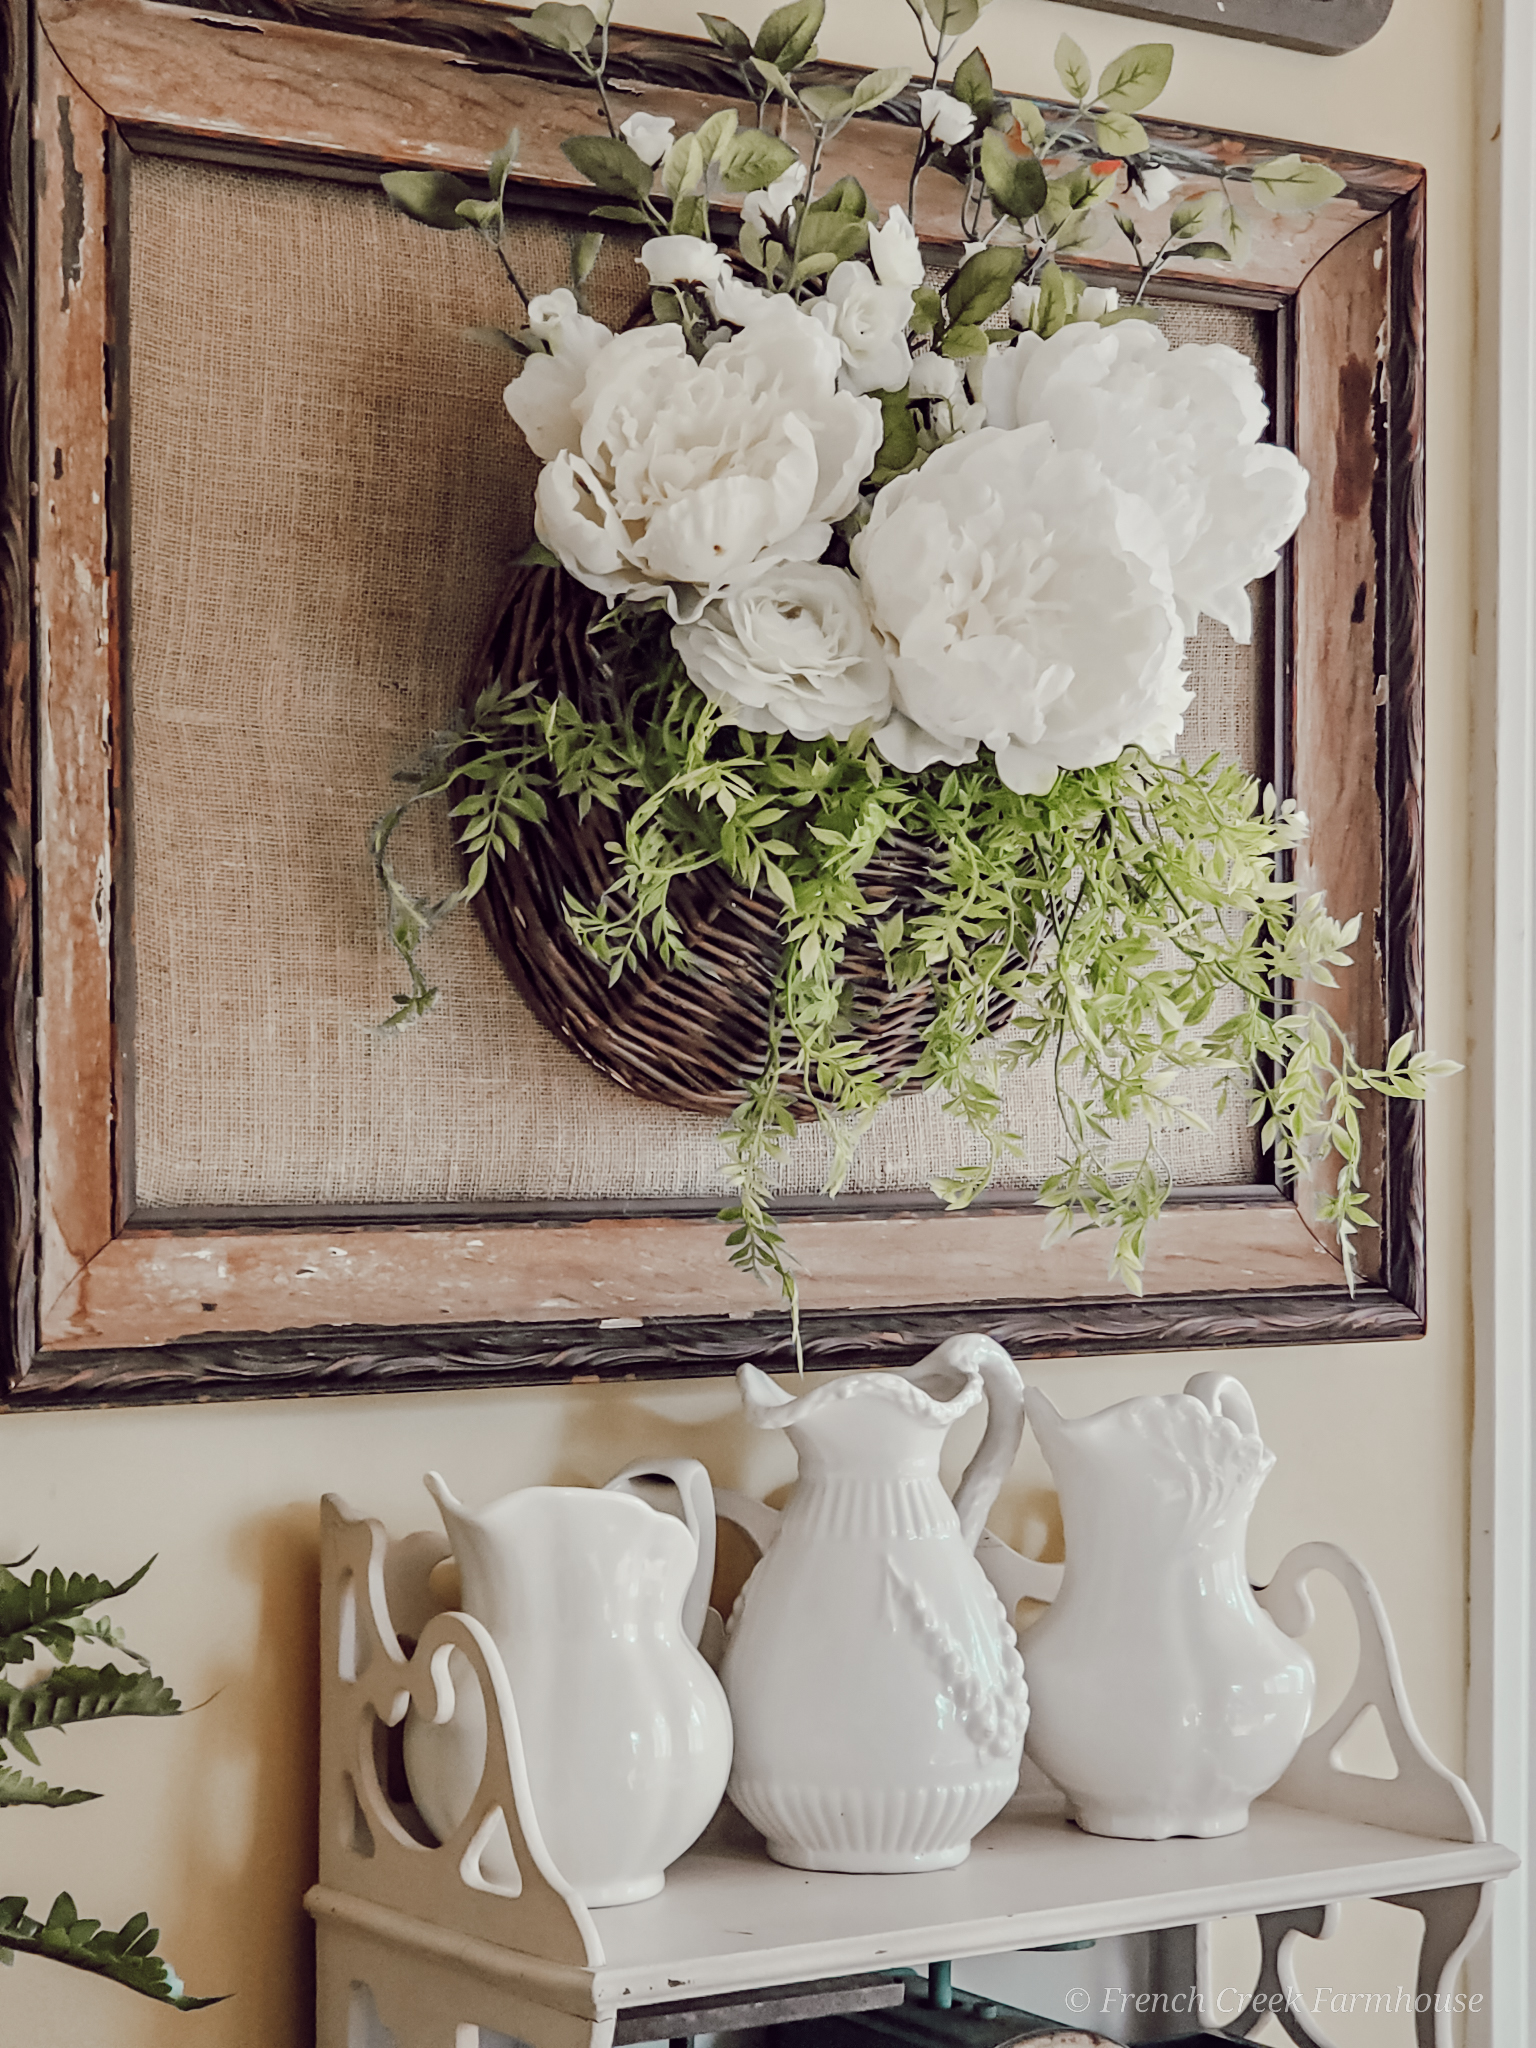 Wall hanging basket filled with white peonies